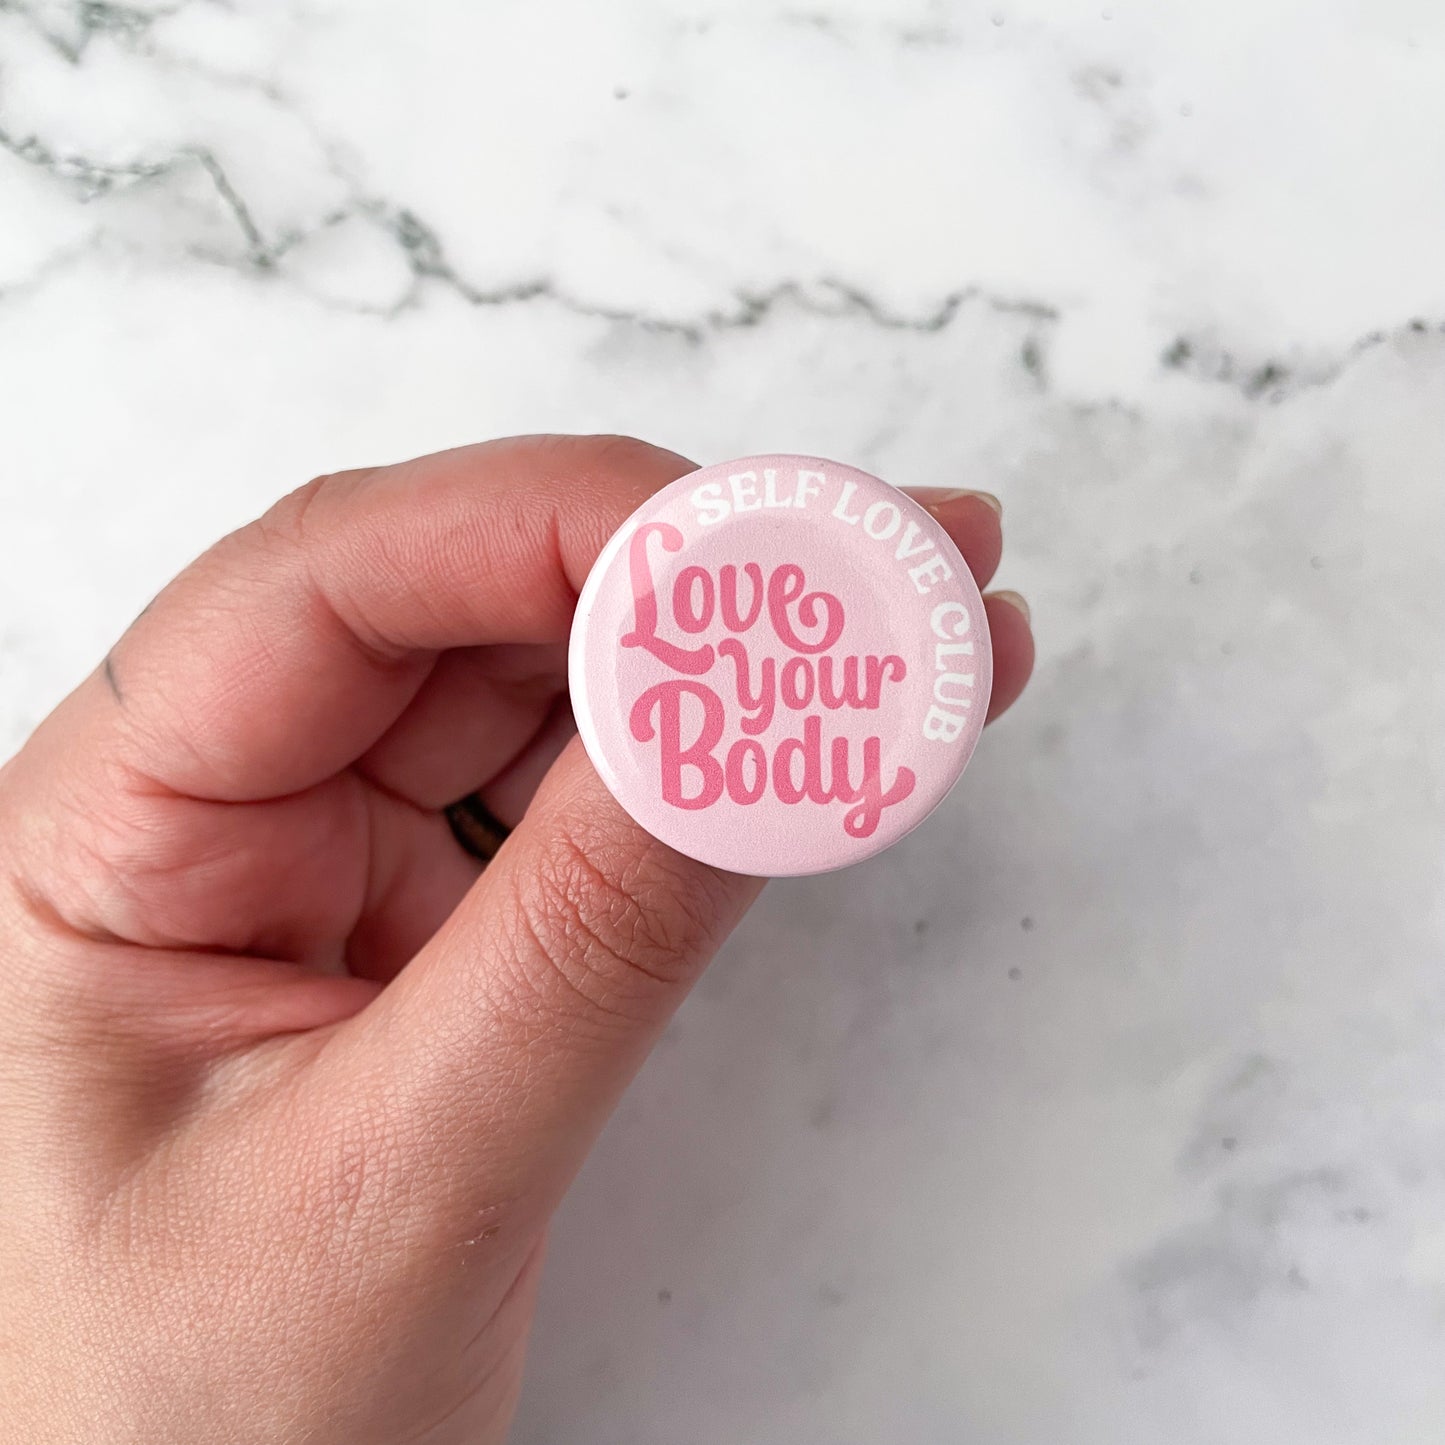 Love Your Body Self Love Club Button / Badge (Buy 4 Get 1 FREE)